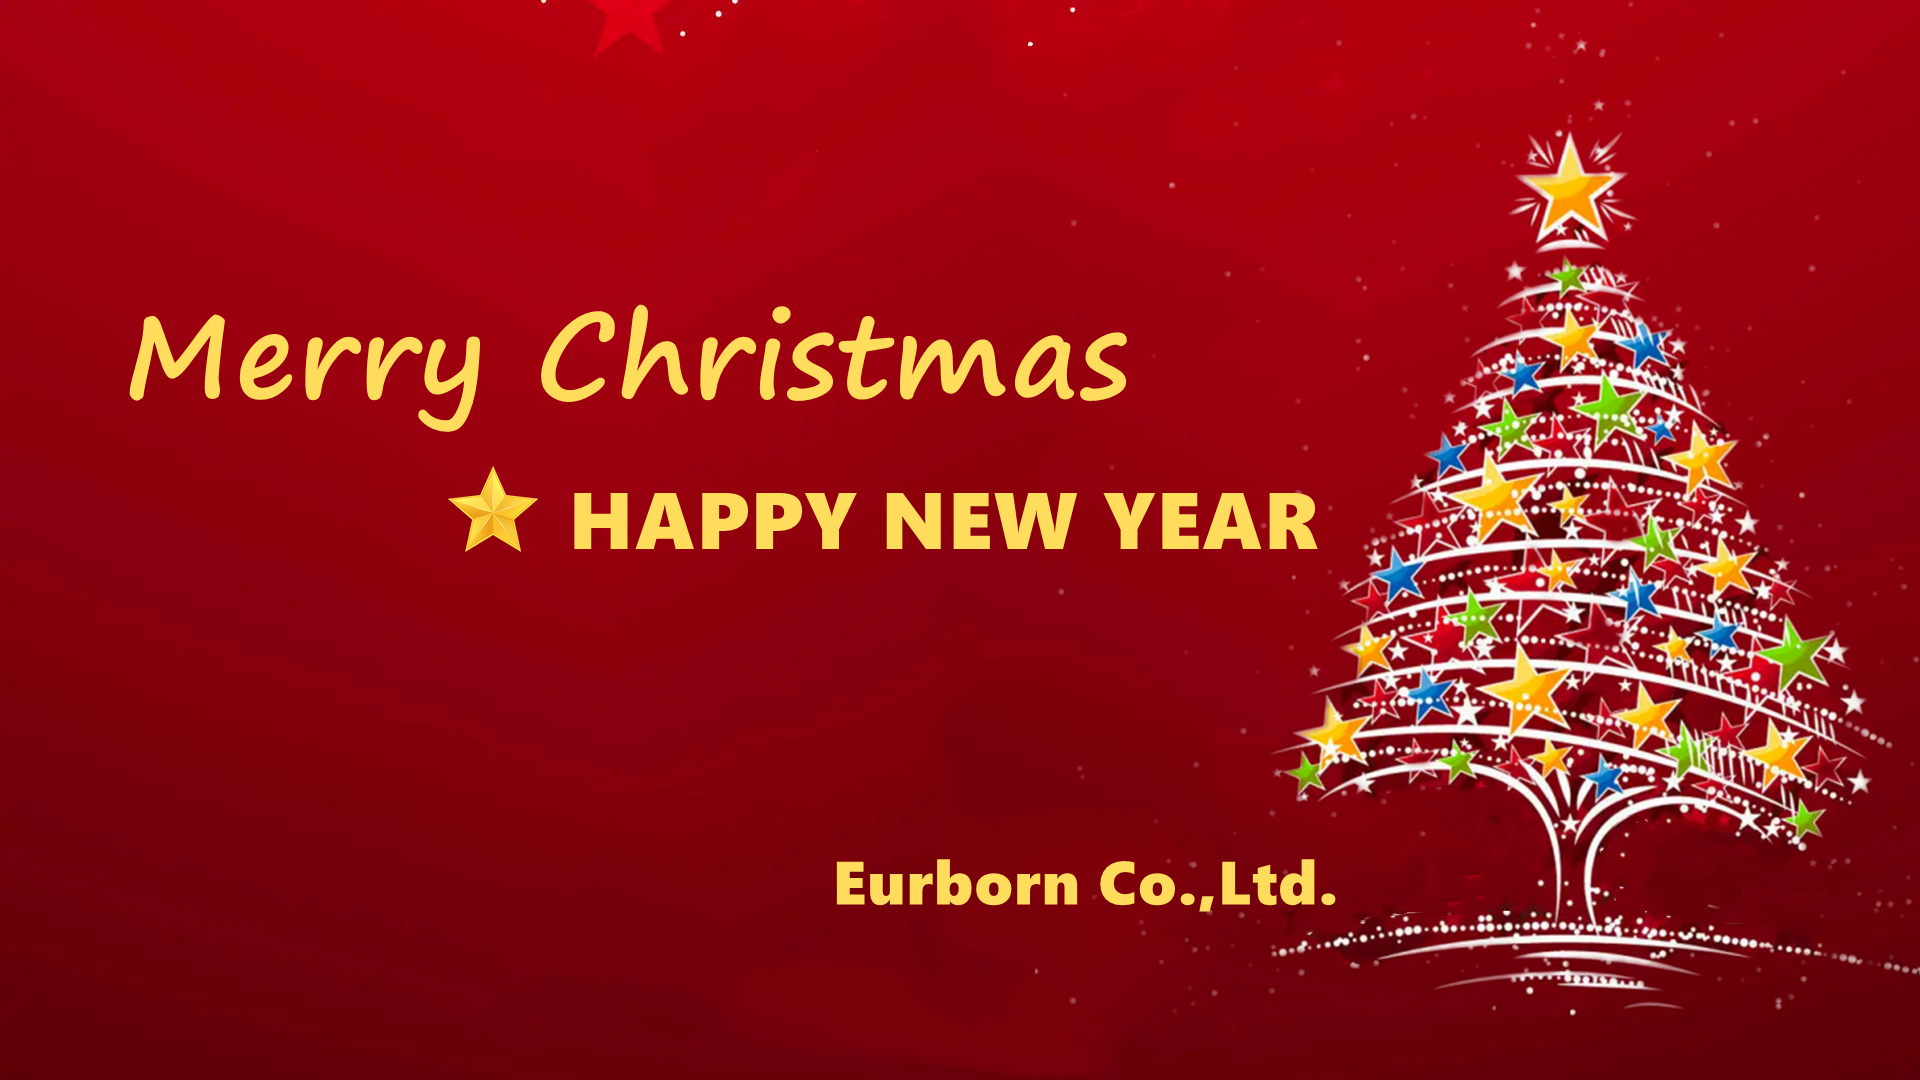 Merry Christmas and Happy New Year—Eurborn